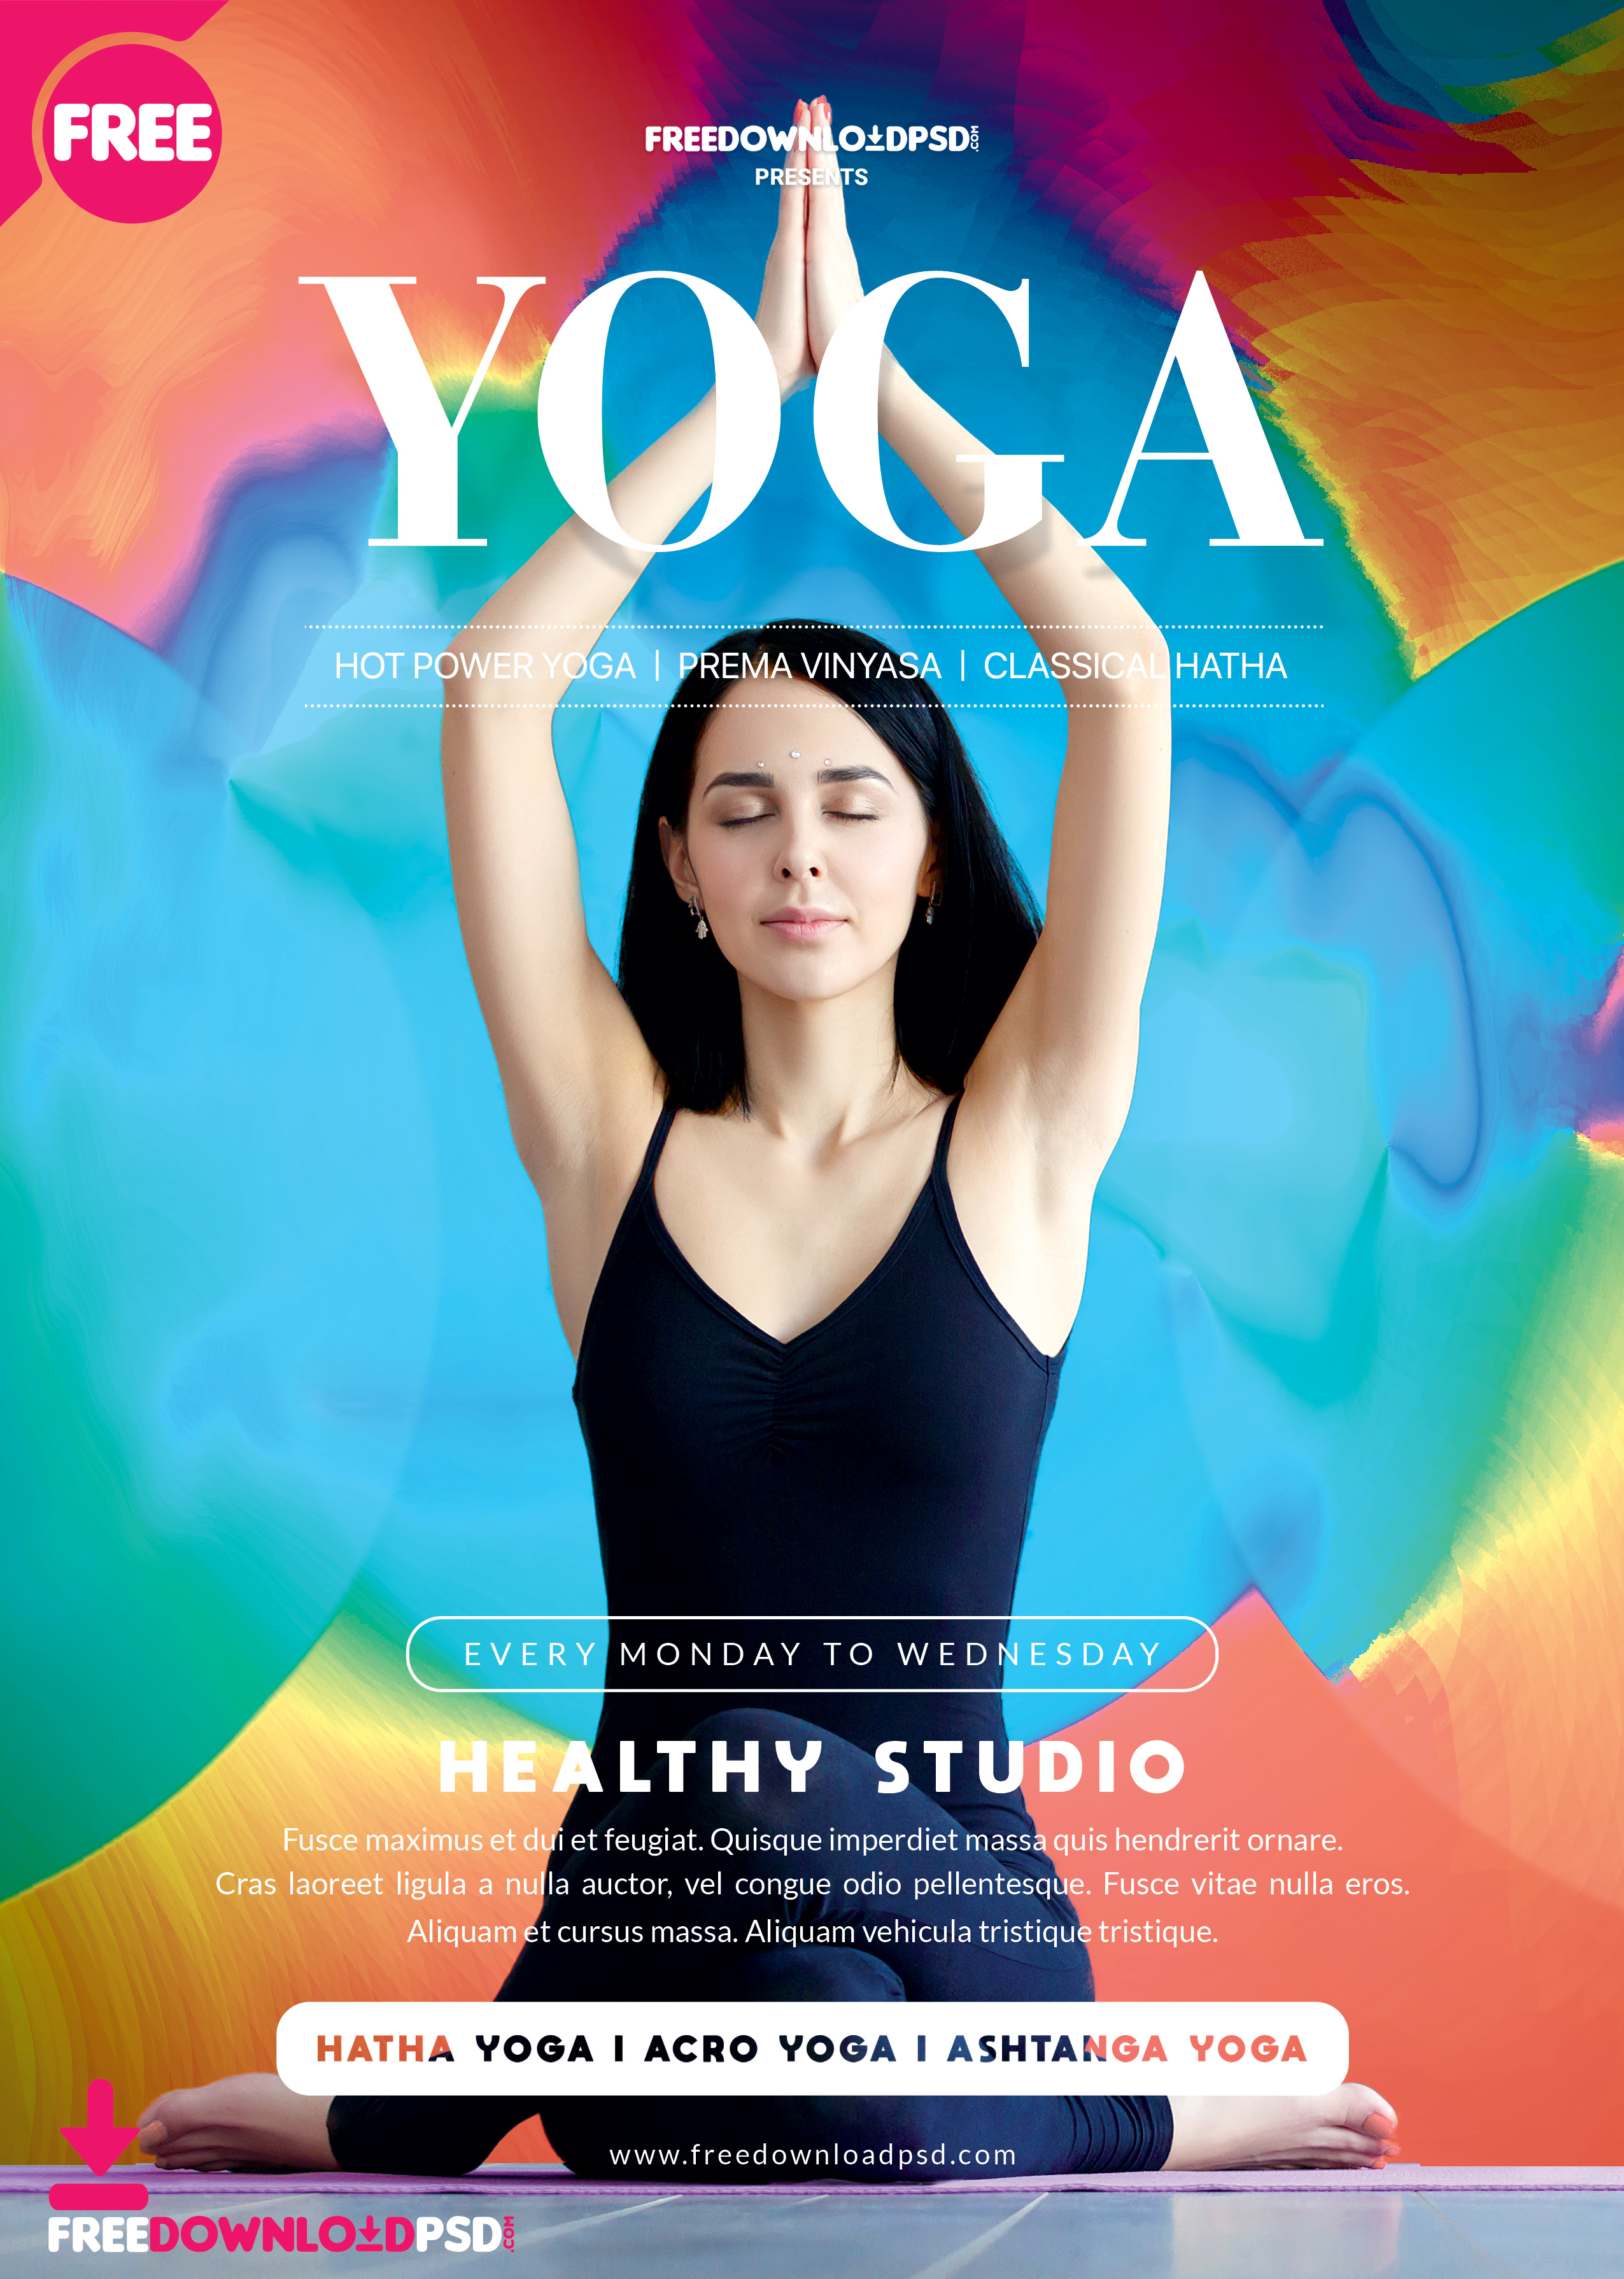 [Free Download] Yoga Flyer Free PSD